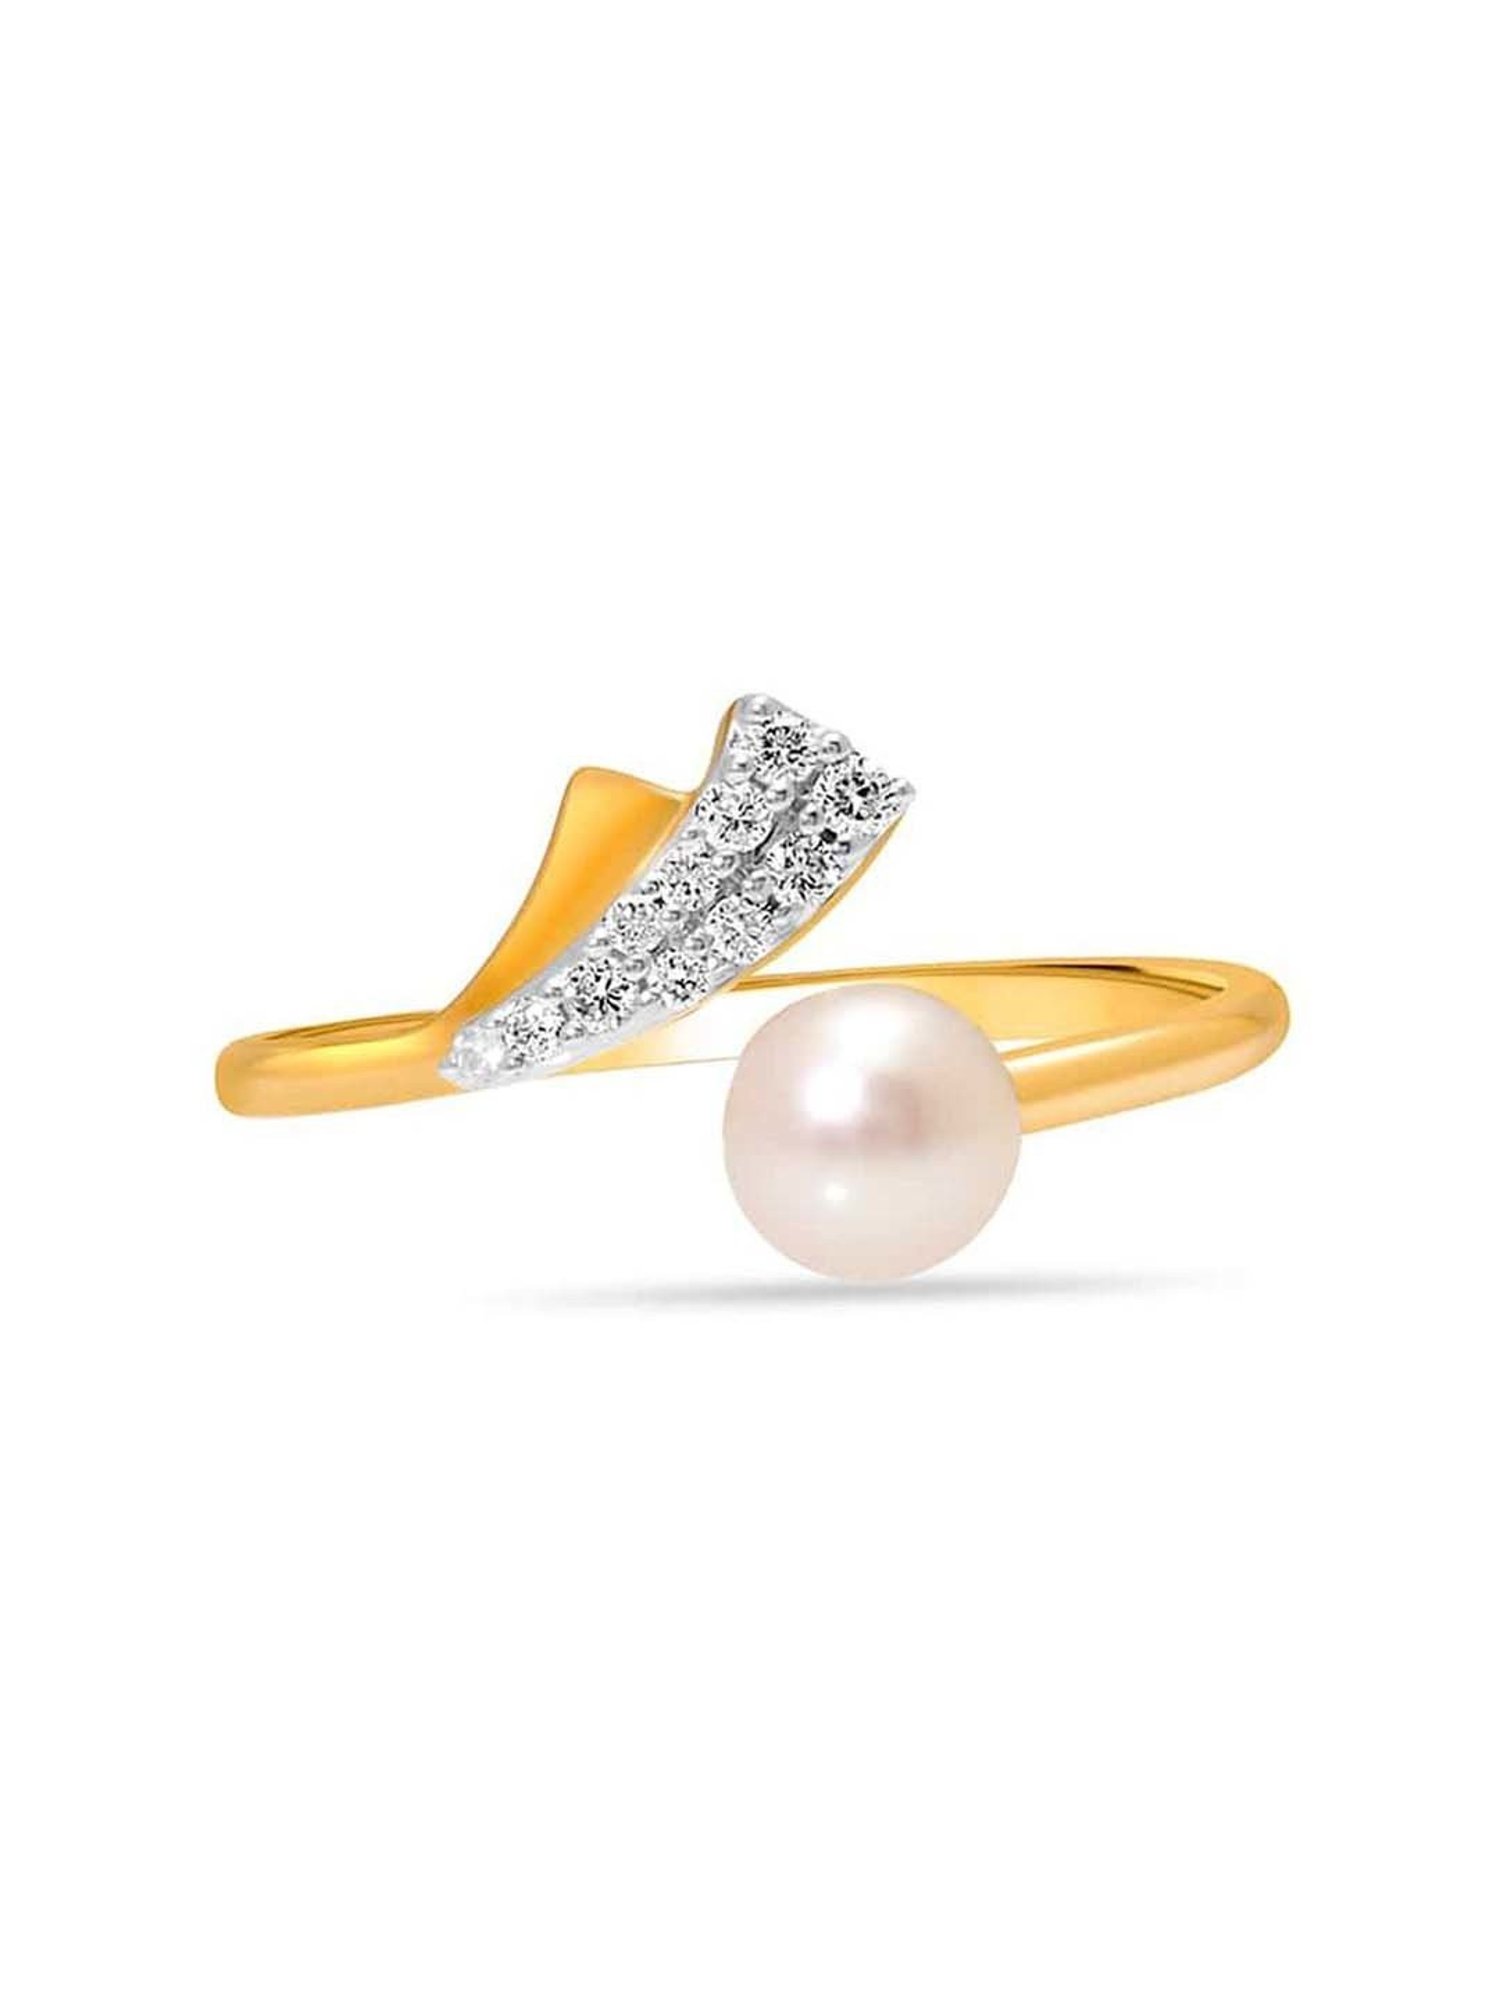 Pearl rings for wom - 22K Gold Indian Jewelry in USA